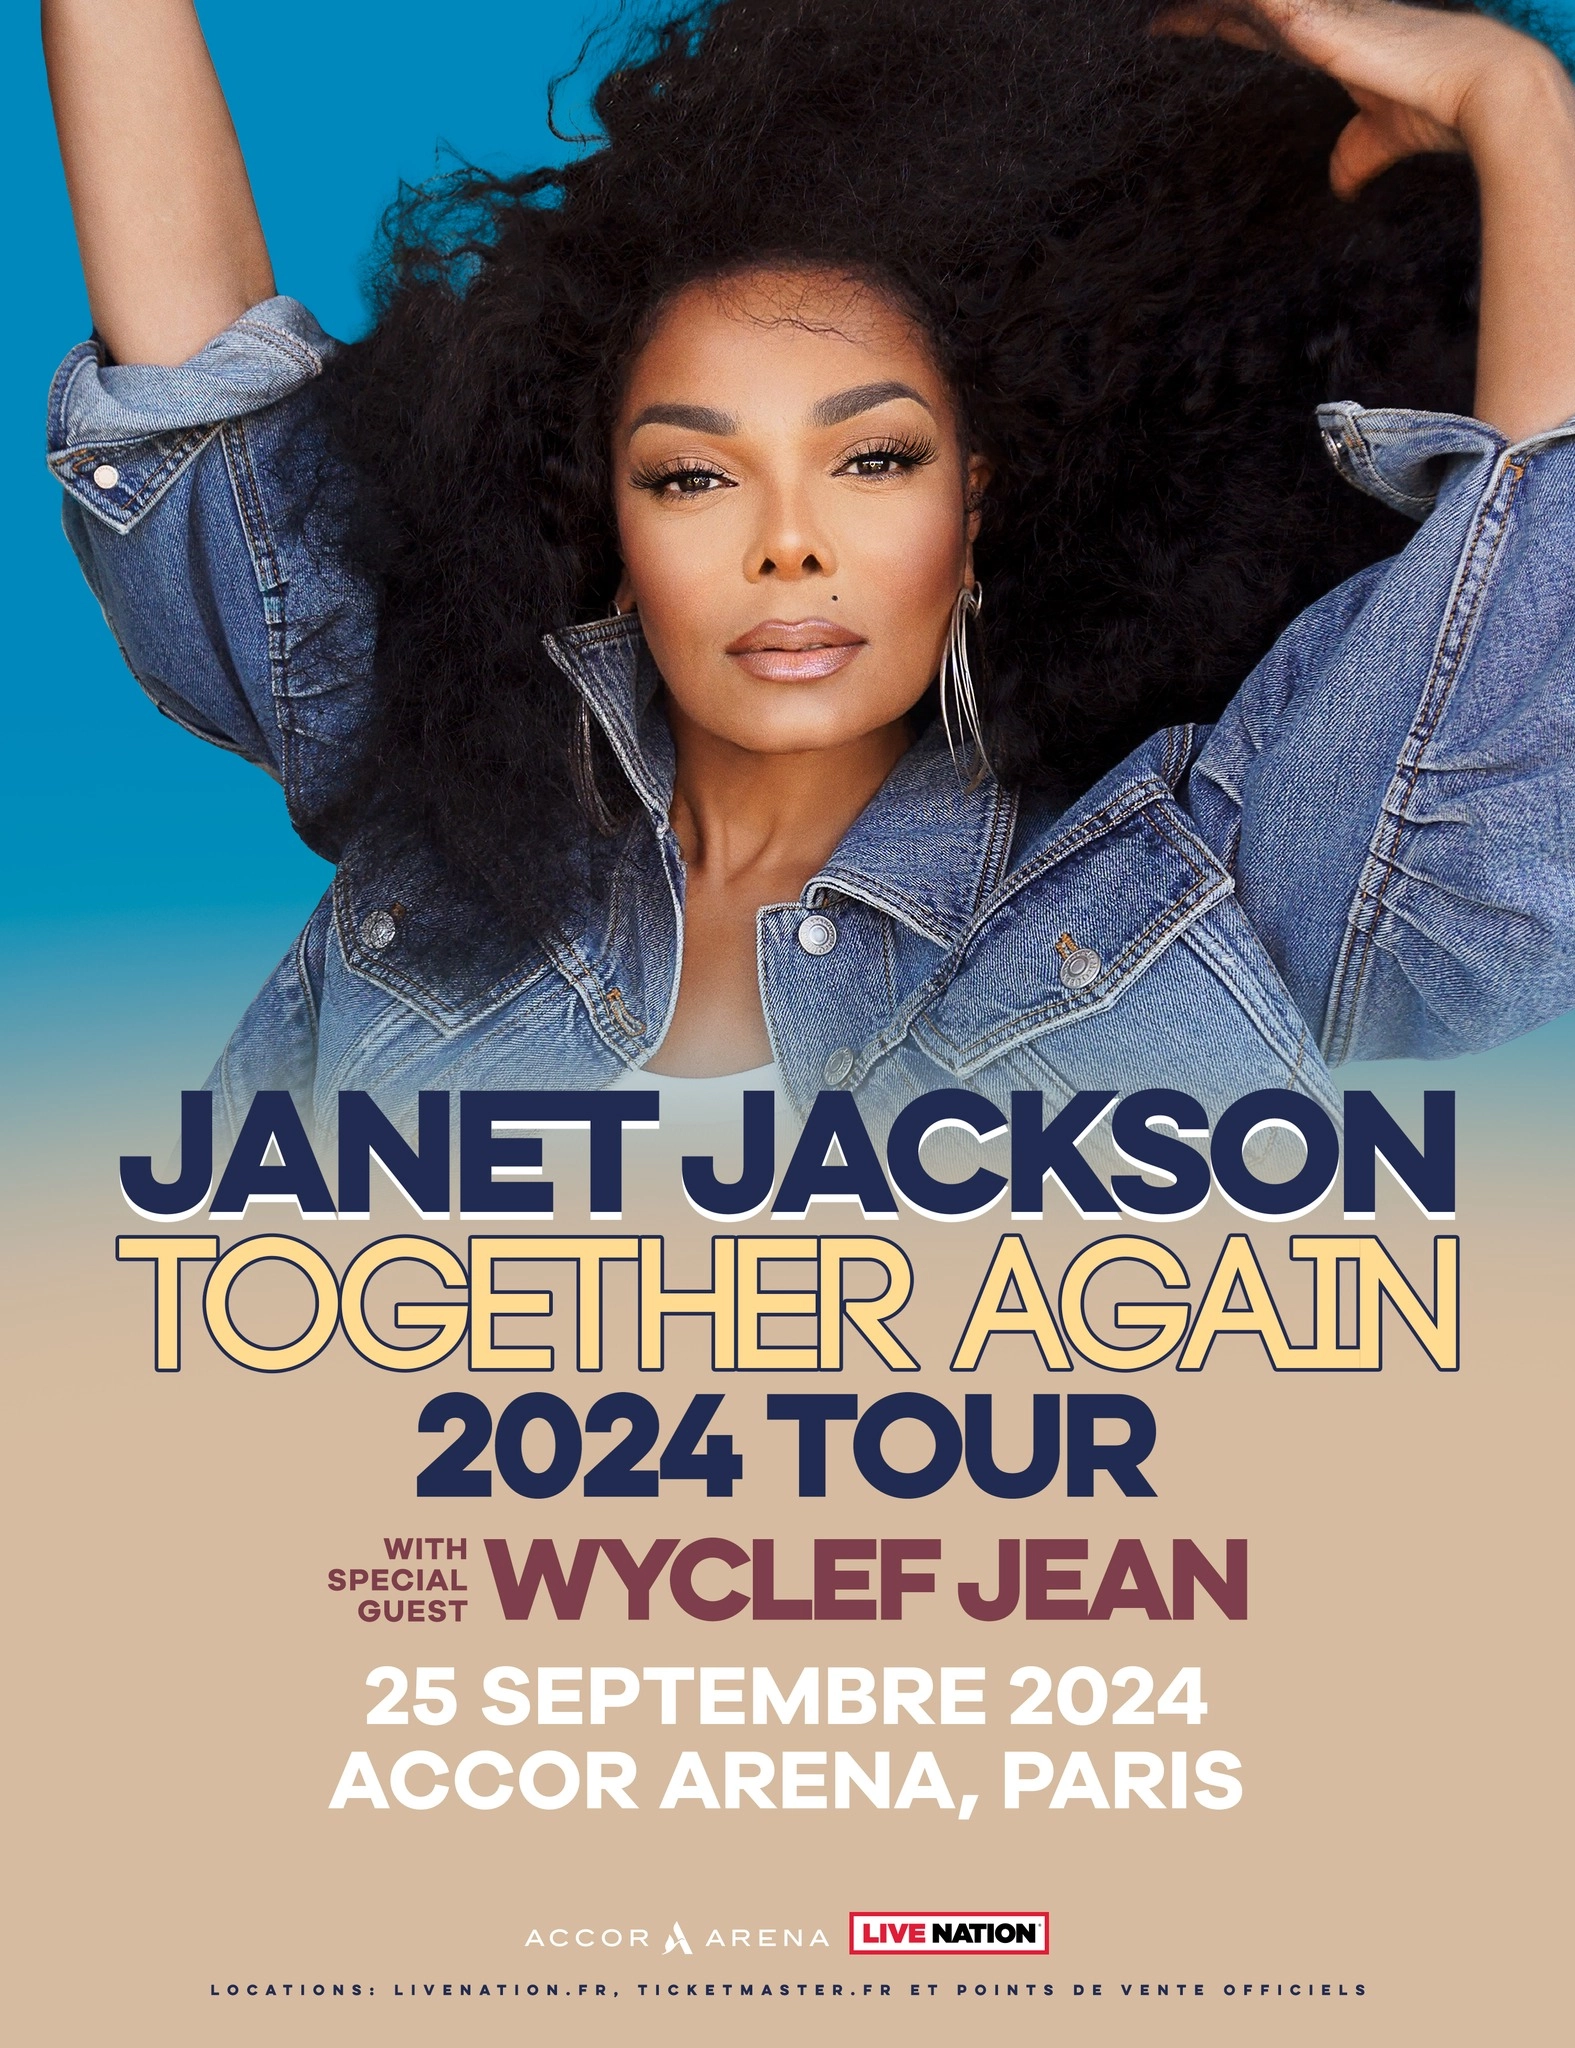 Janet Jackson at Accor Arena Tickets